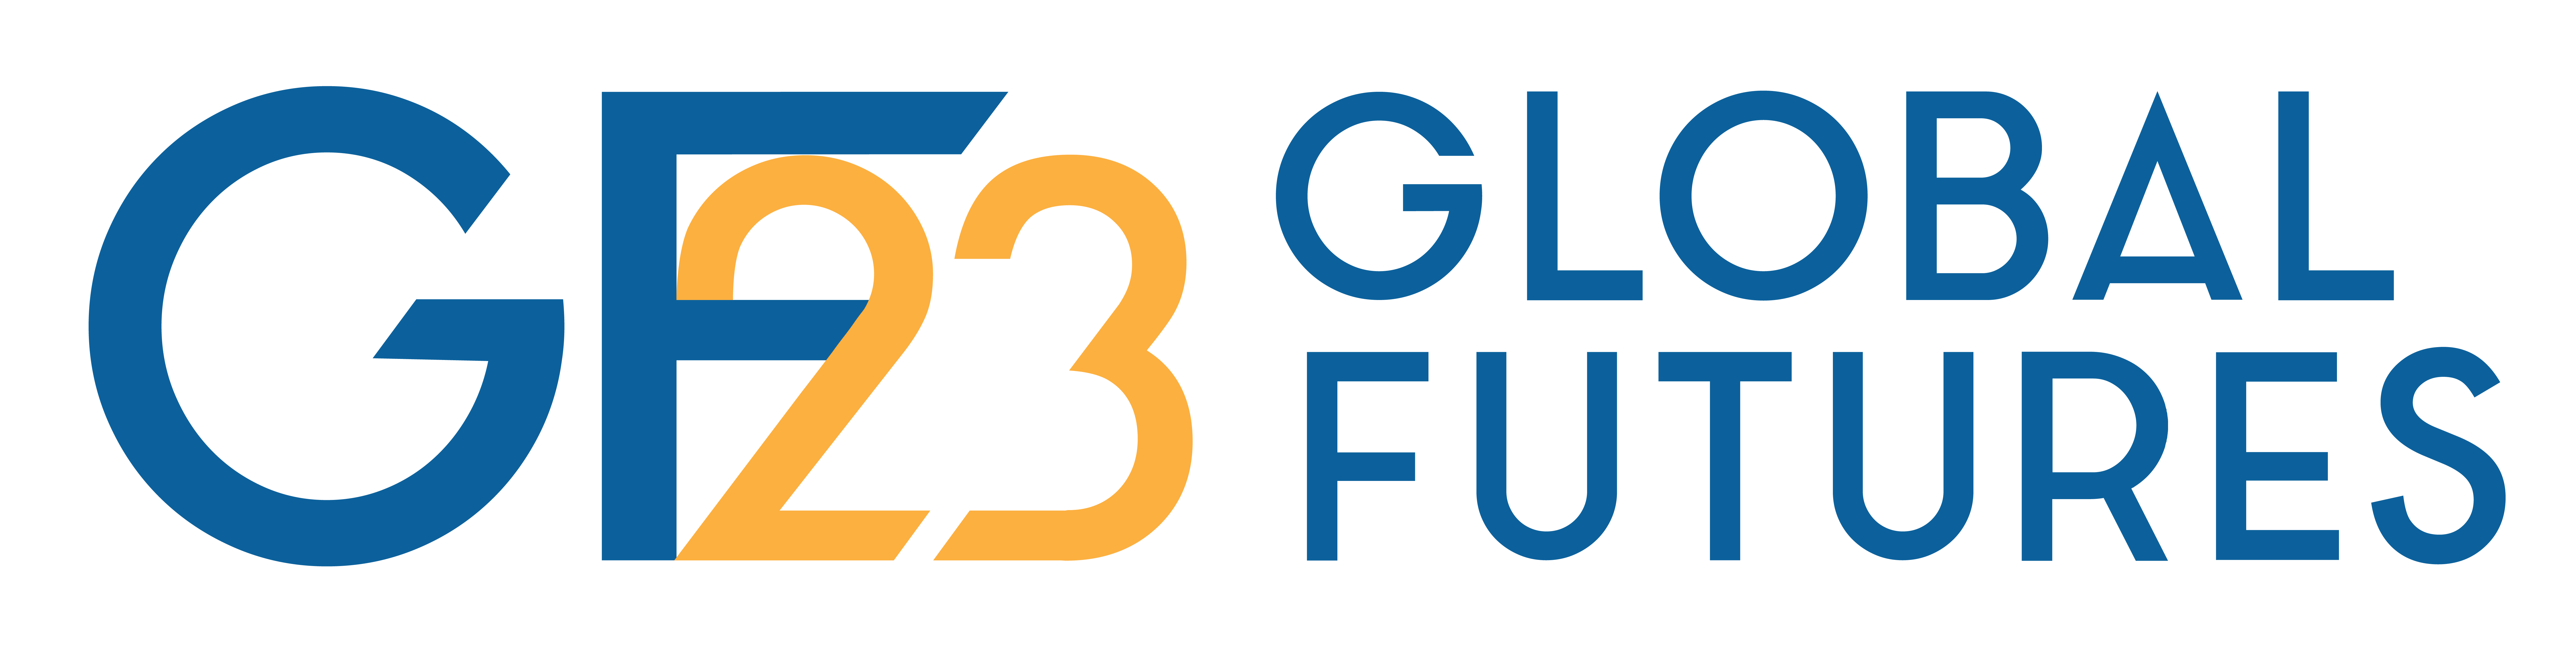 https://globalfuturesconference.org/wp-content/themes/global-futures-conference-wordpress-child-theme/img/logo/gfc-header-logo-23.png